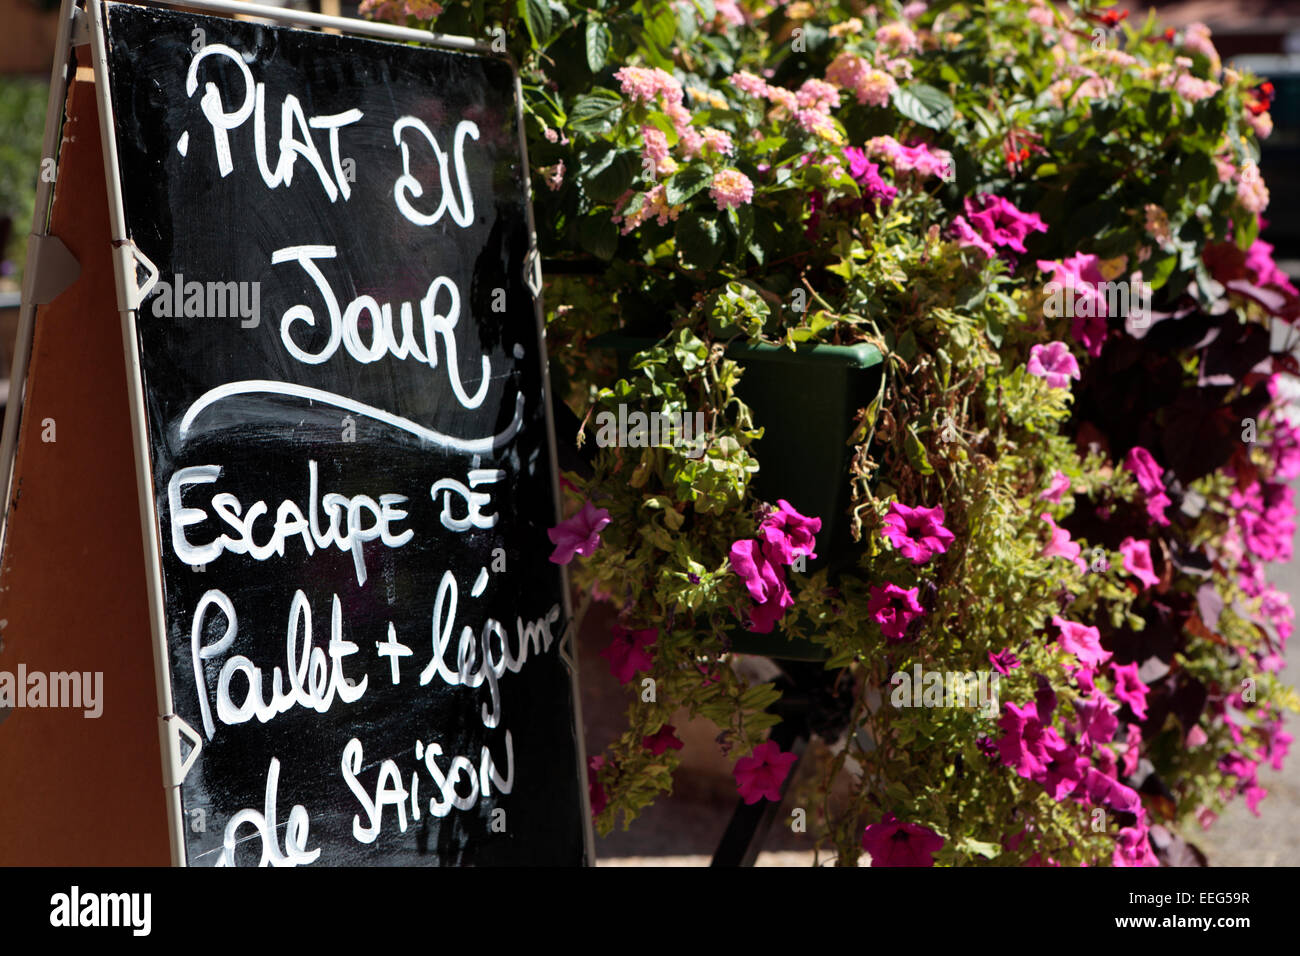 Restaurant in Provence, France with menu board and flower display. Stock Photo